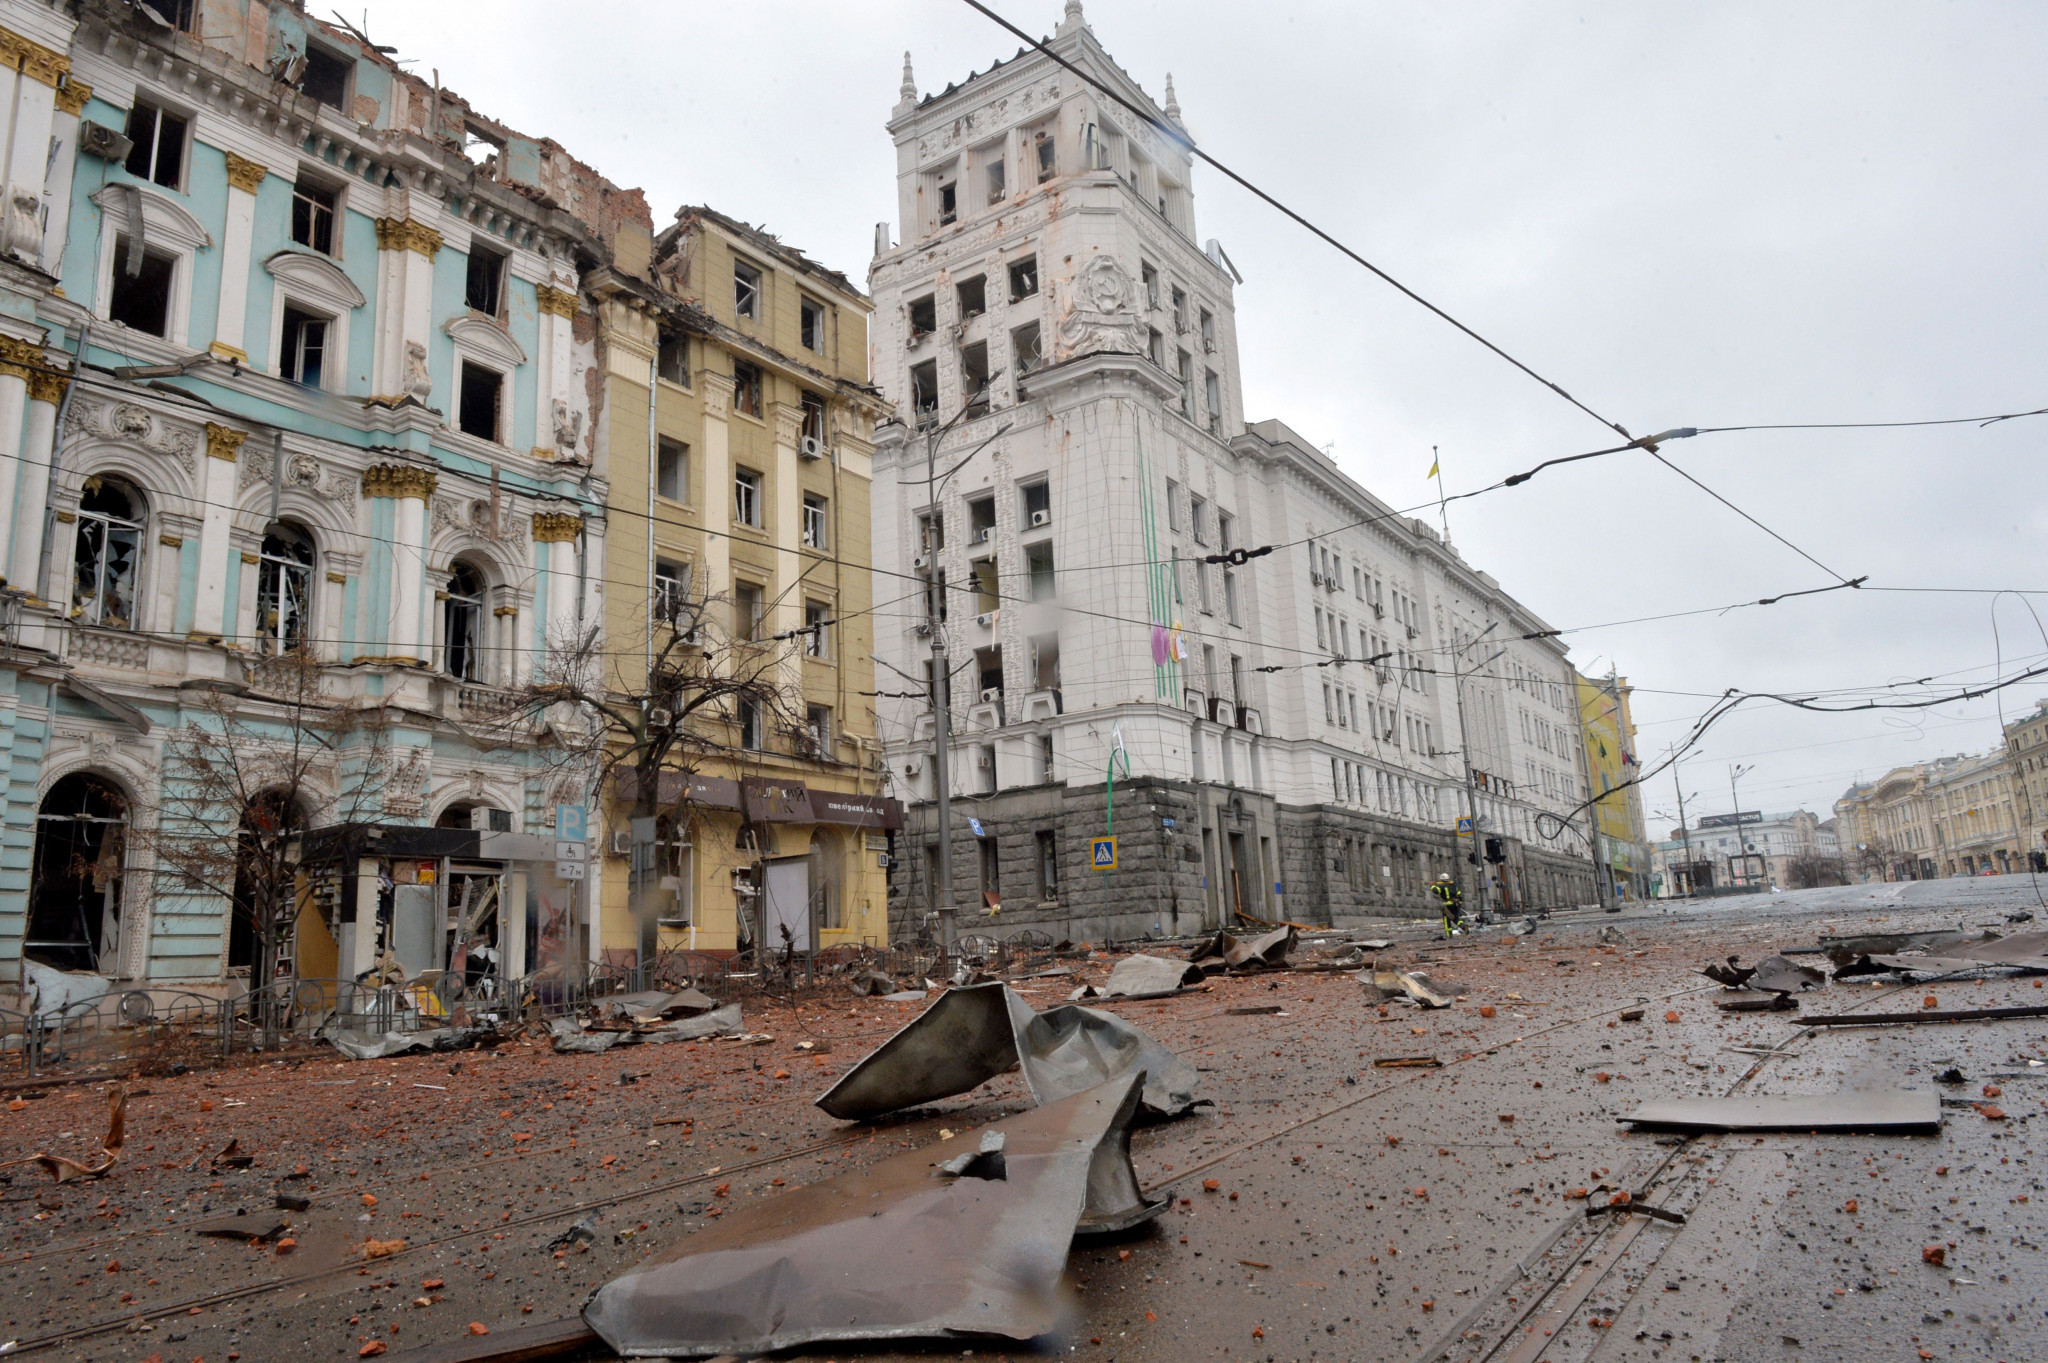 Kharkiv is one of many Ukrainian cities affected by the Russian invasion ©Getty Images